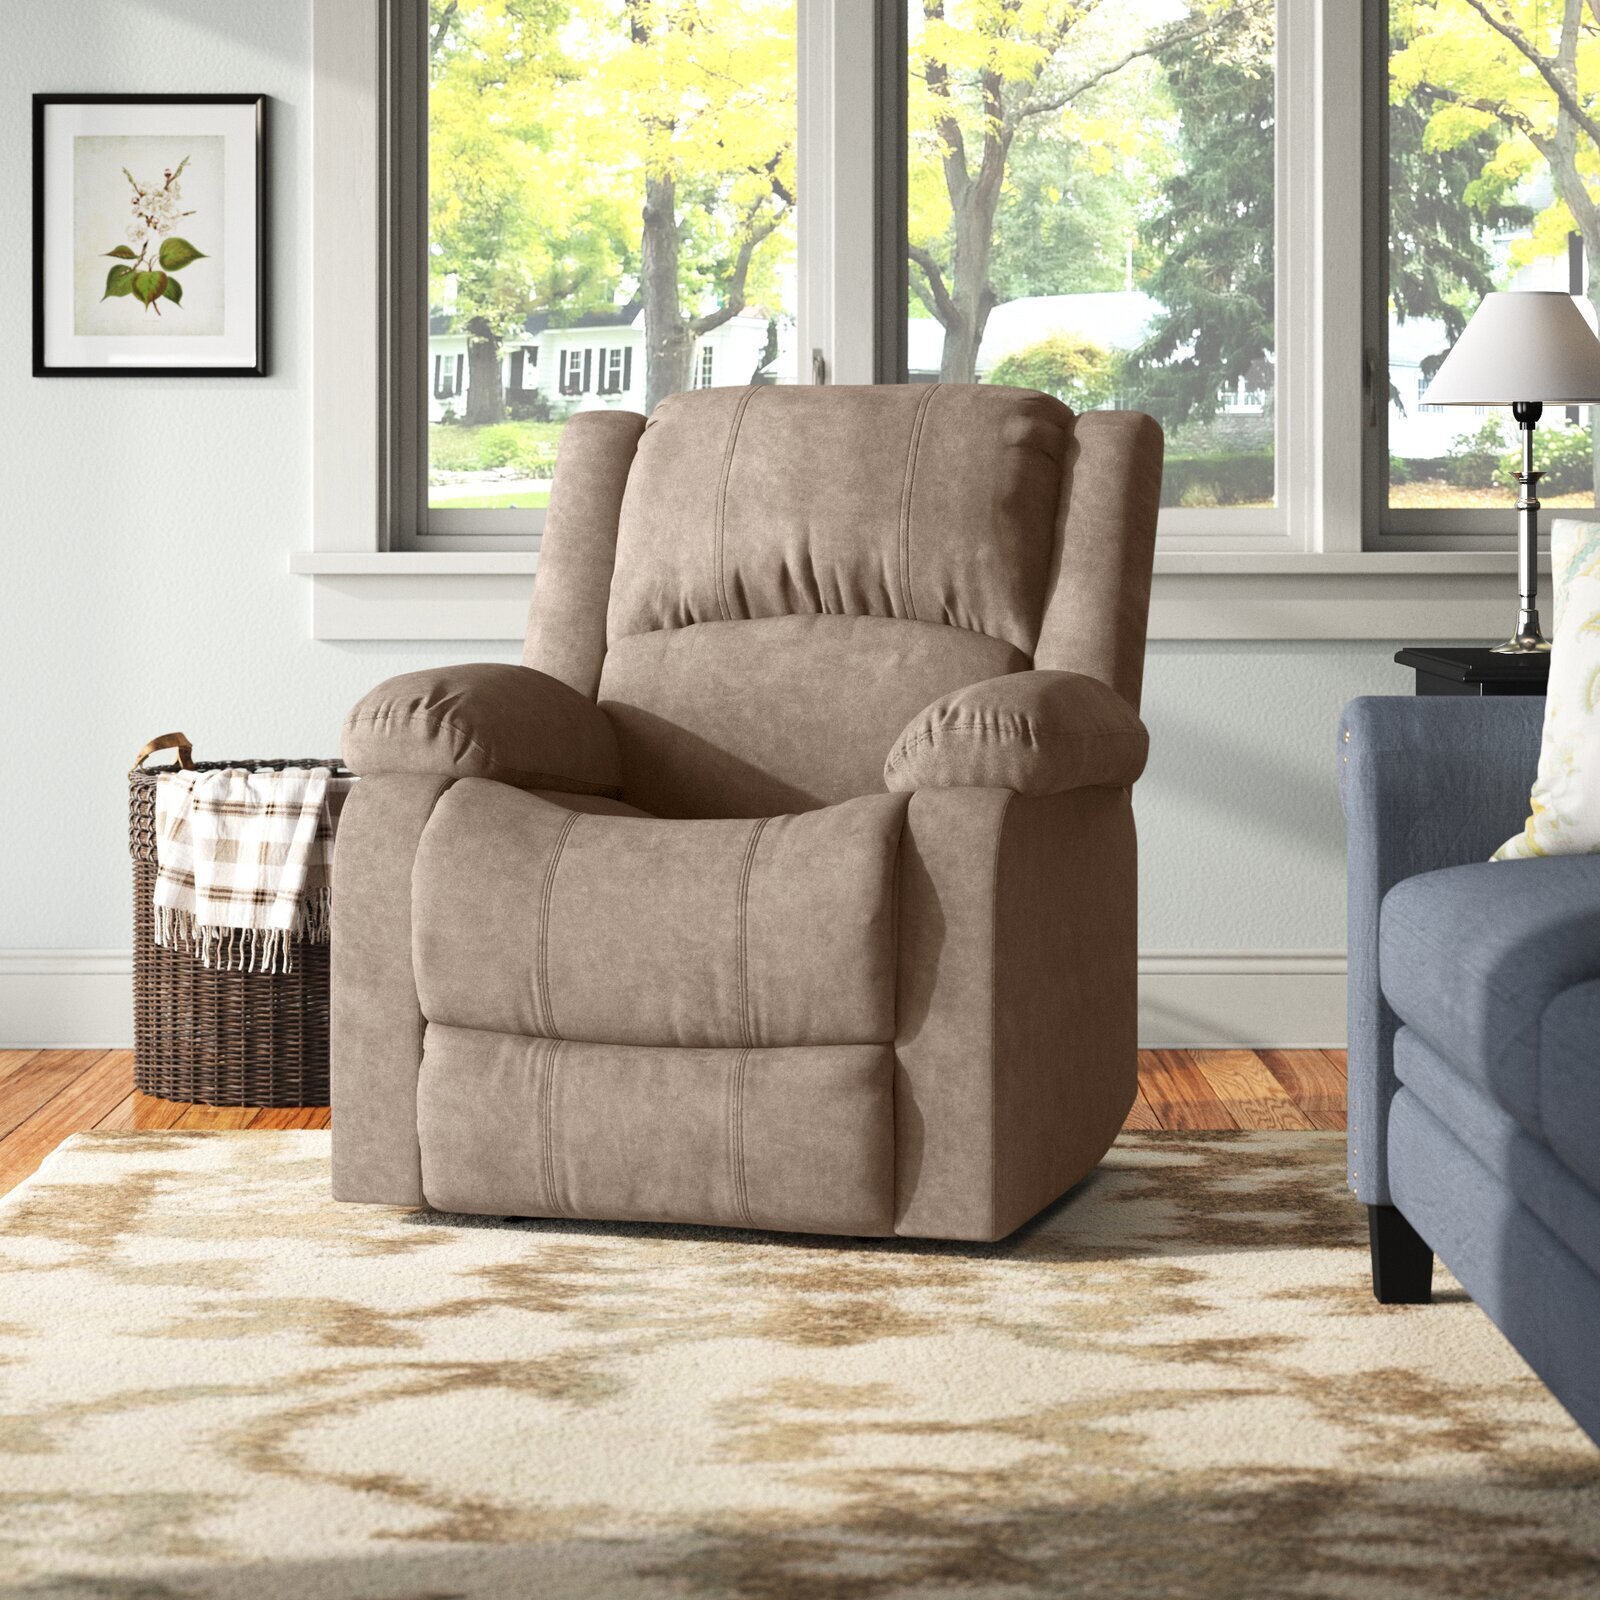 Ultra Comfortable Recliners for Short People